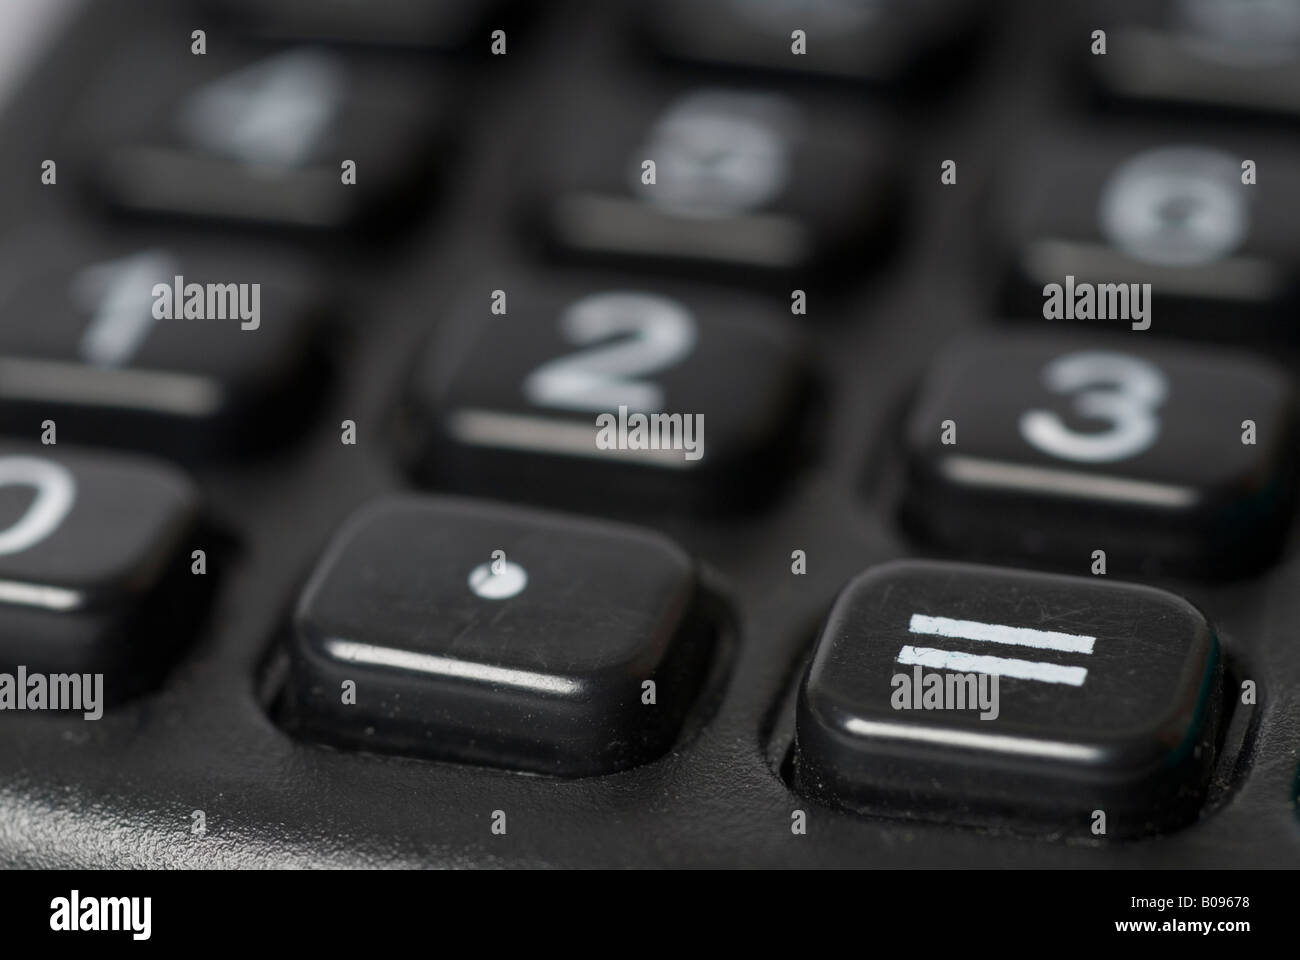 Stock photo of a close up image of an electronic calculator Stock Photo